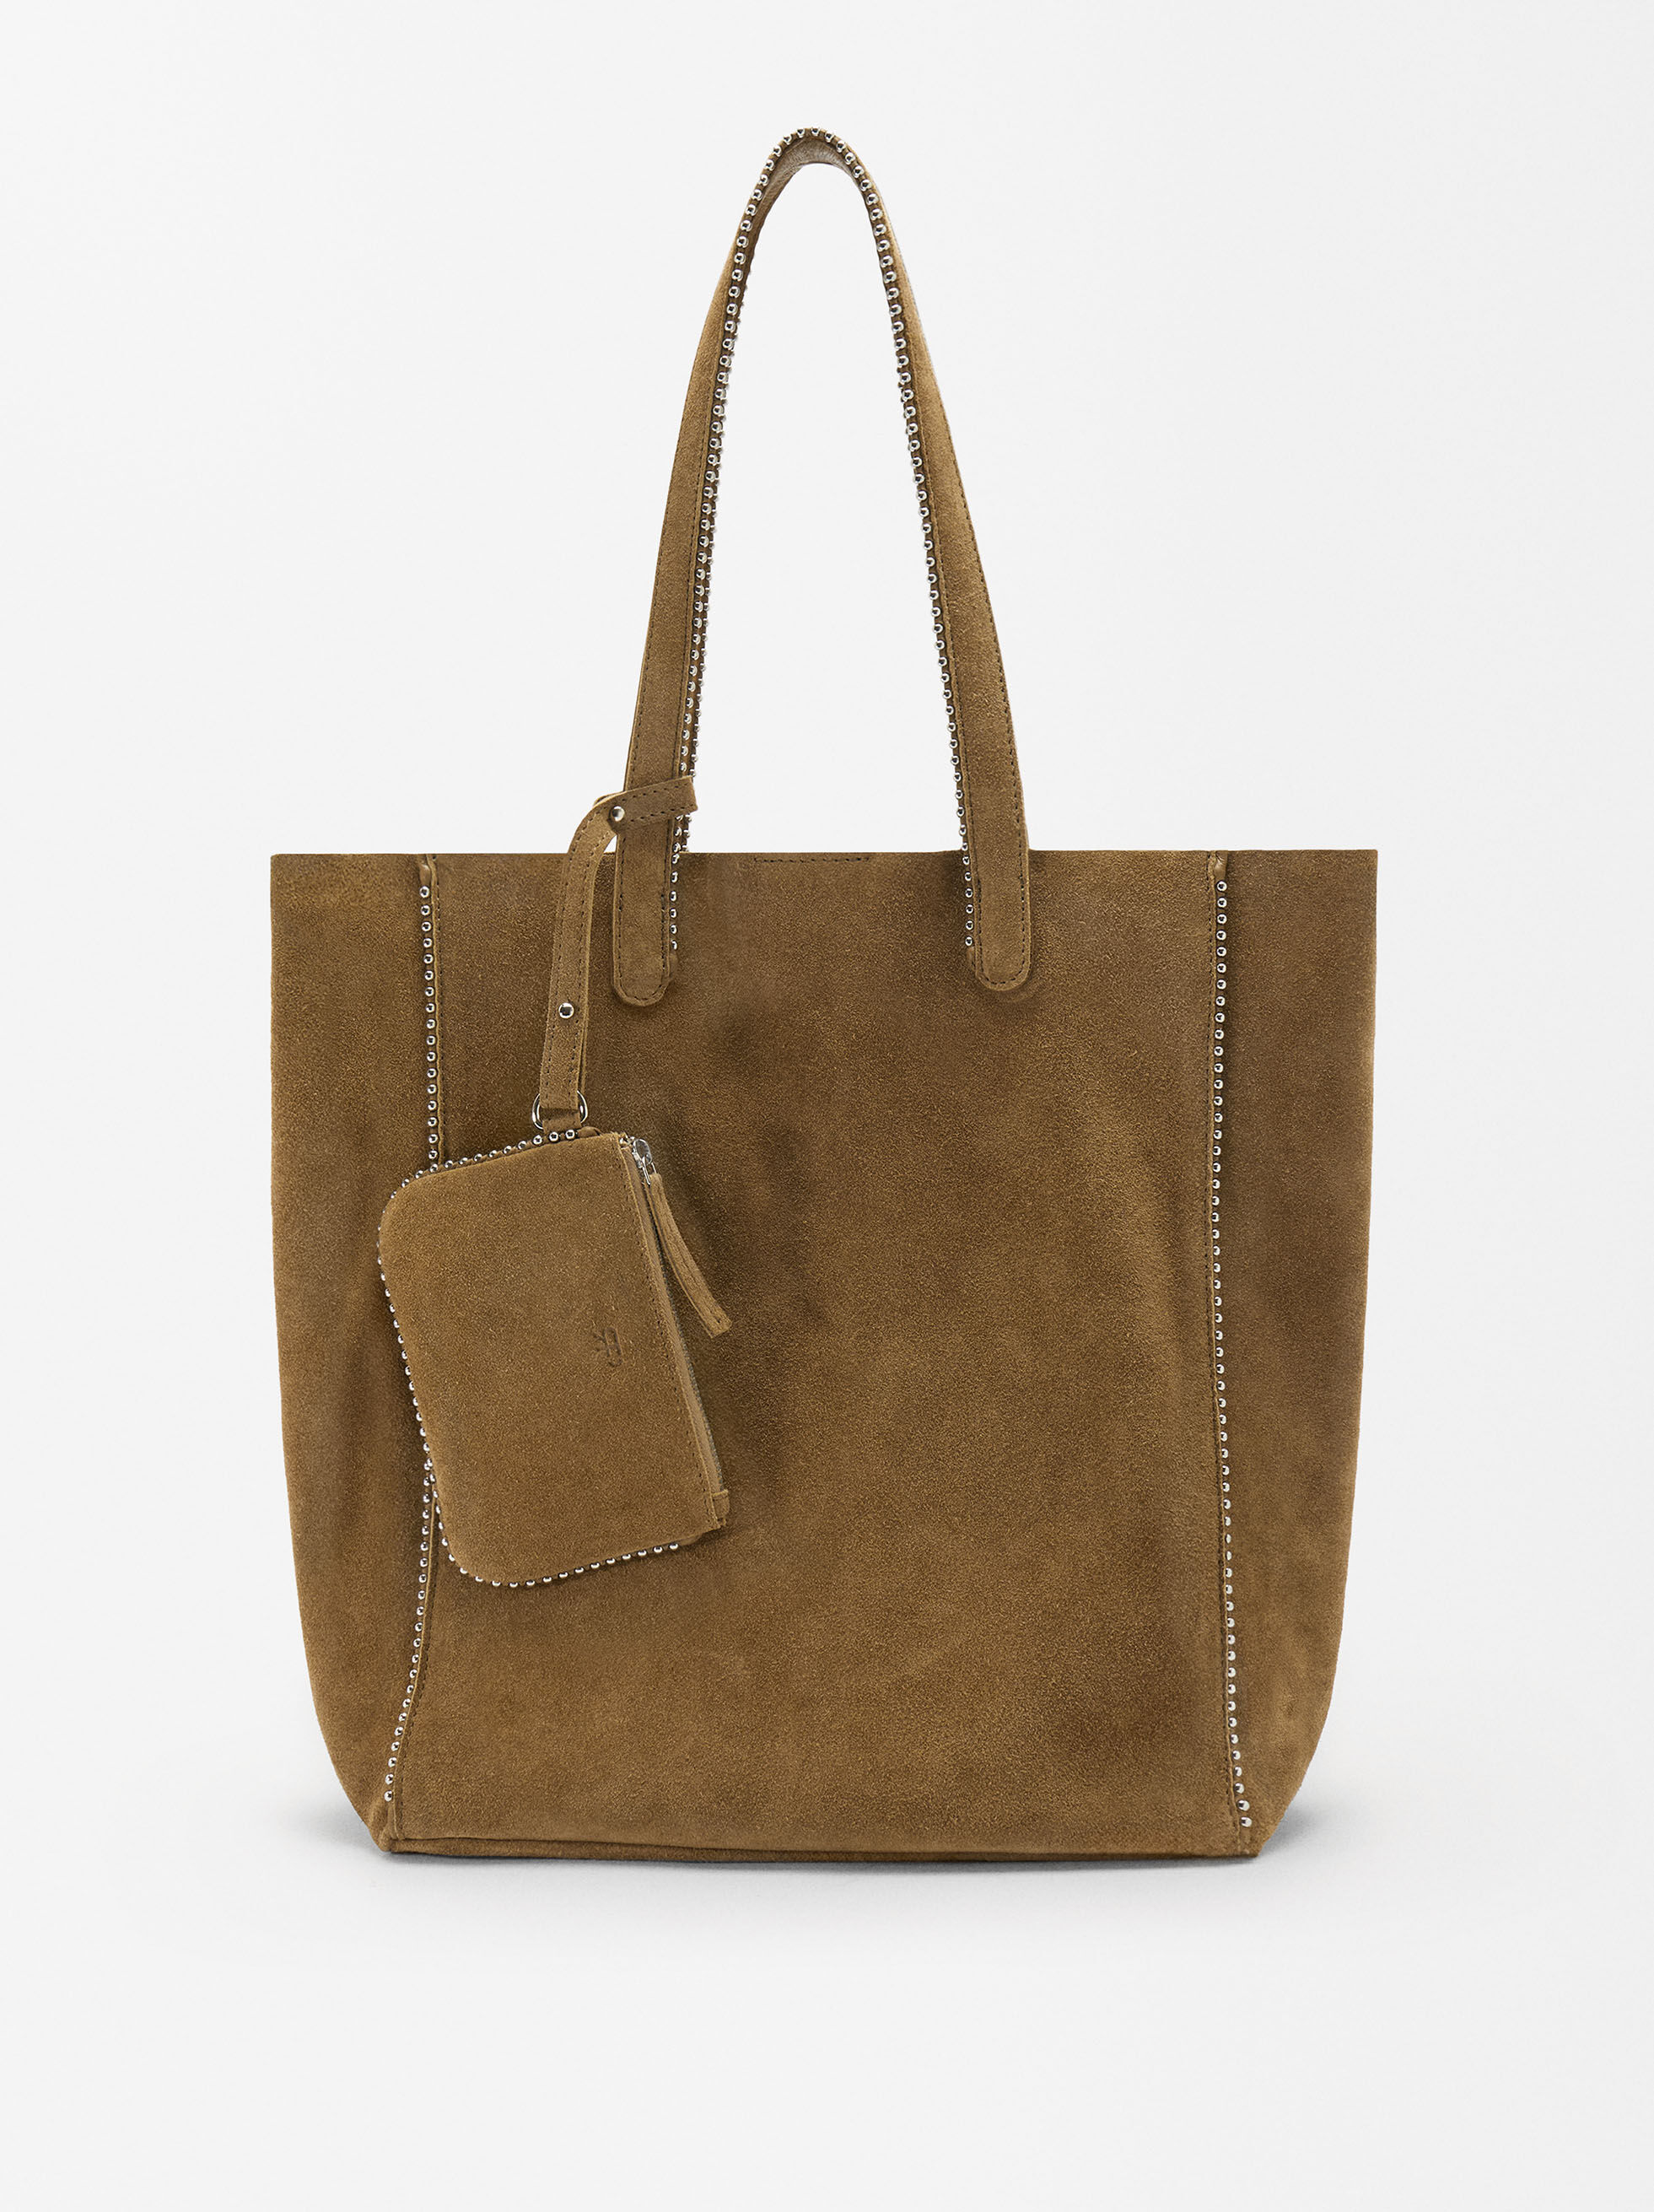 KMM & Co. | Leather tote bags, wallets, and more made in America